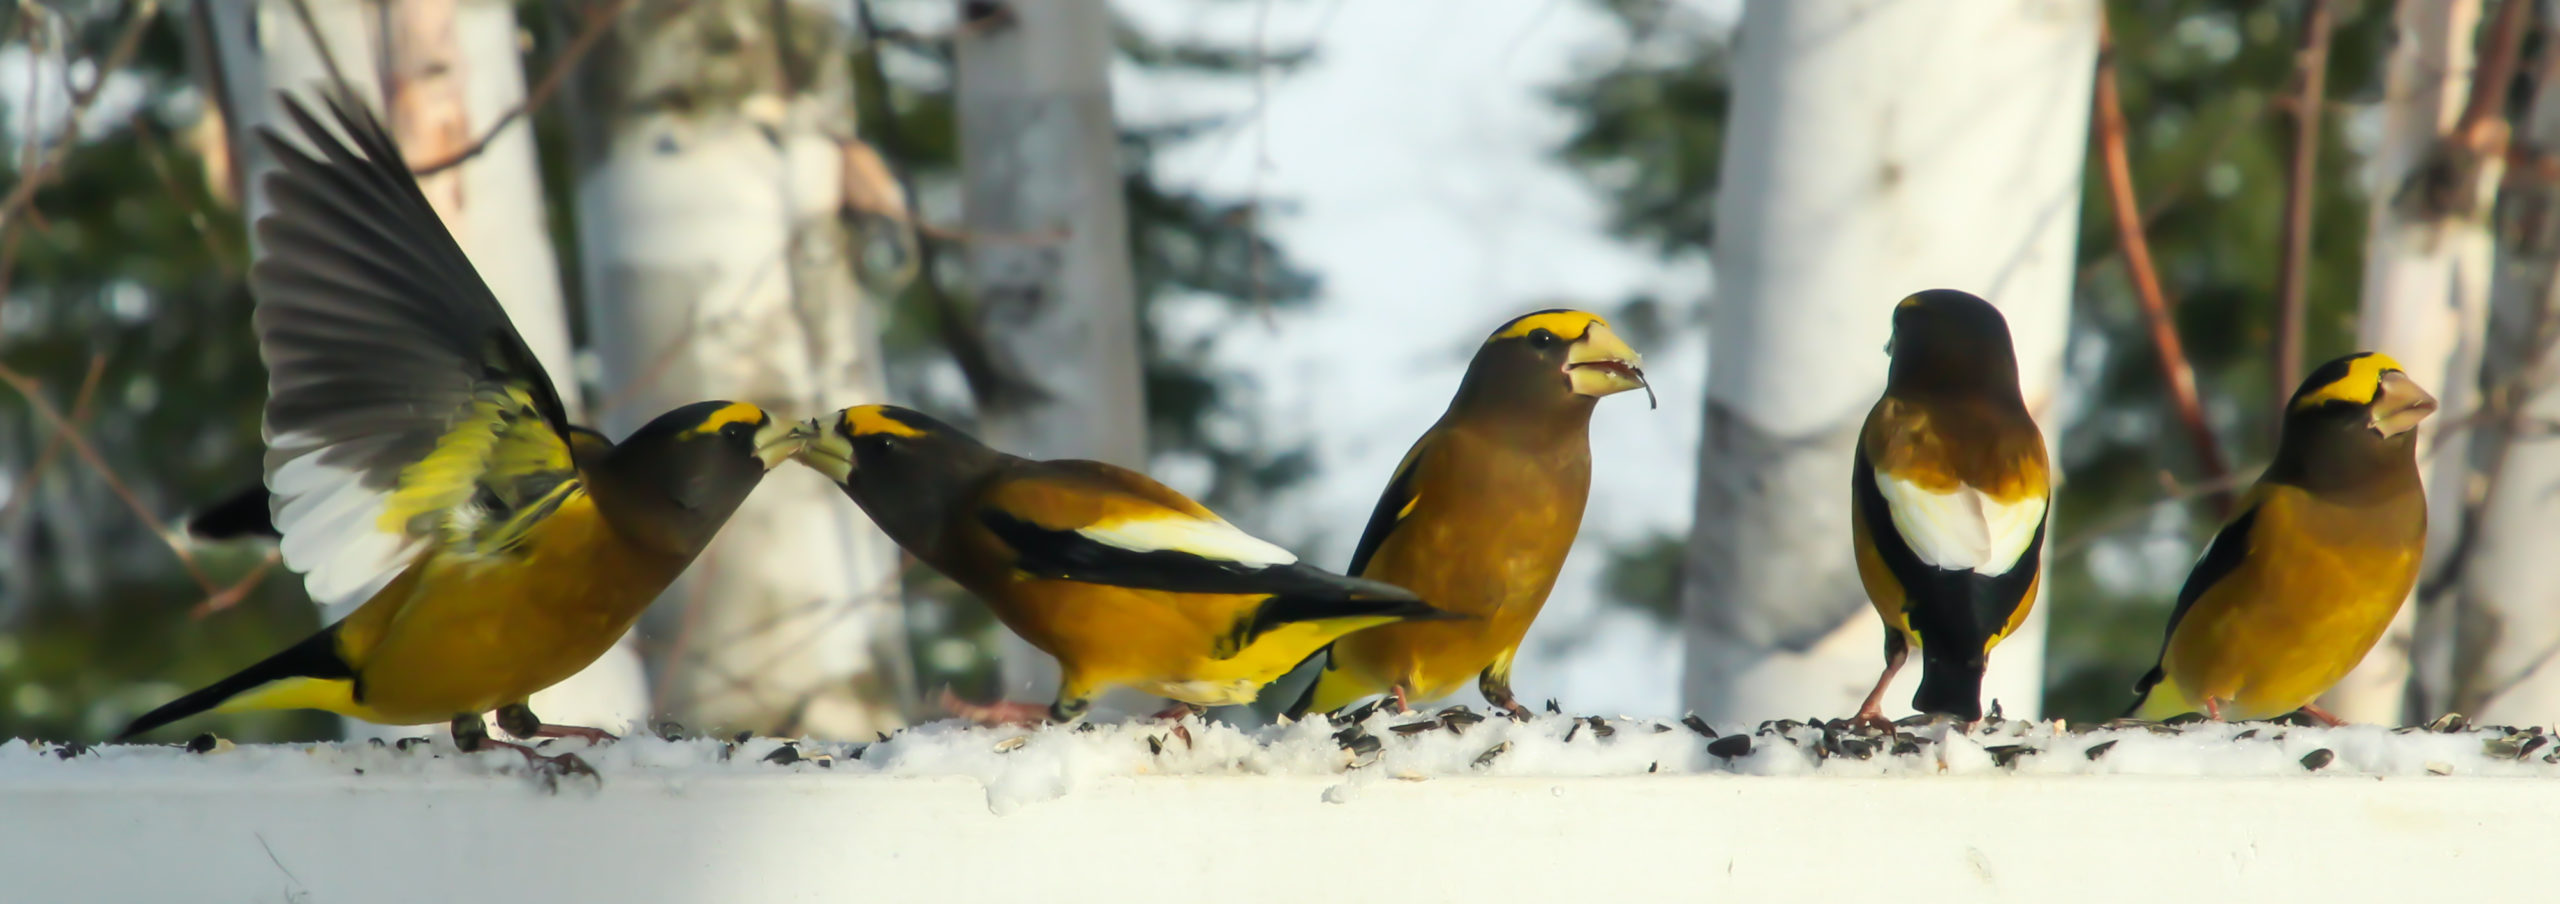 A flock of five bright-yelow birds with white wing patches, black wing stripes, and thick pale bills feeds on sunflower seeds atop snow.